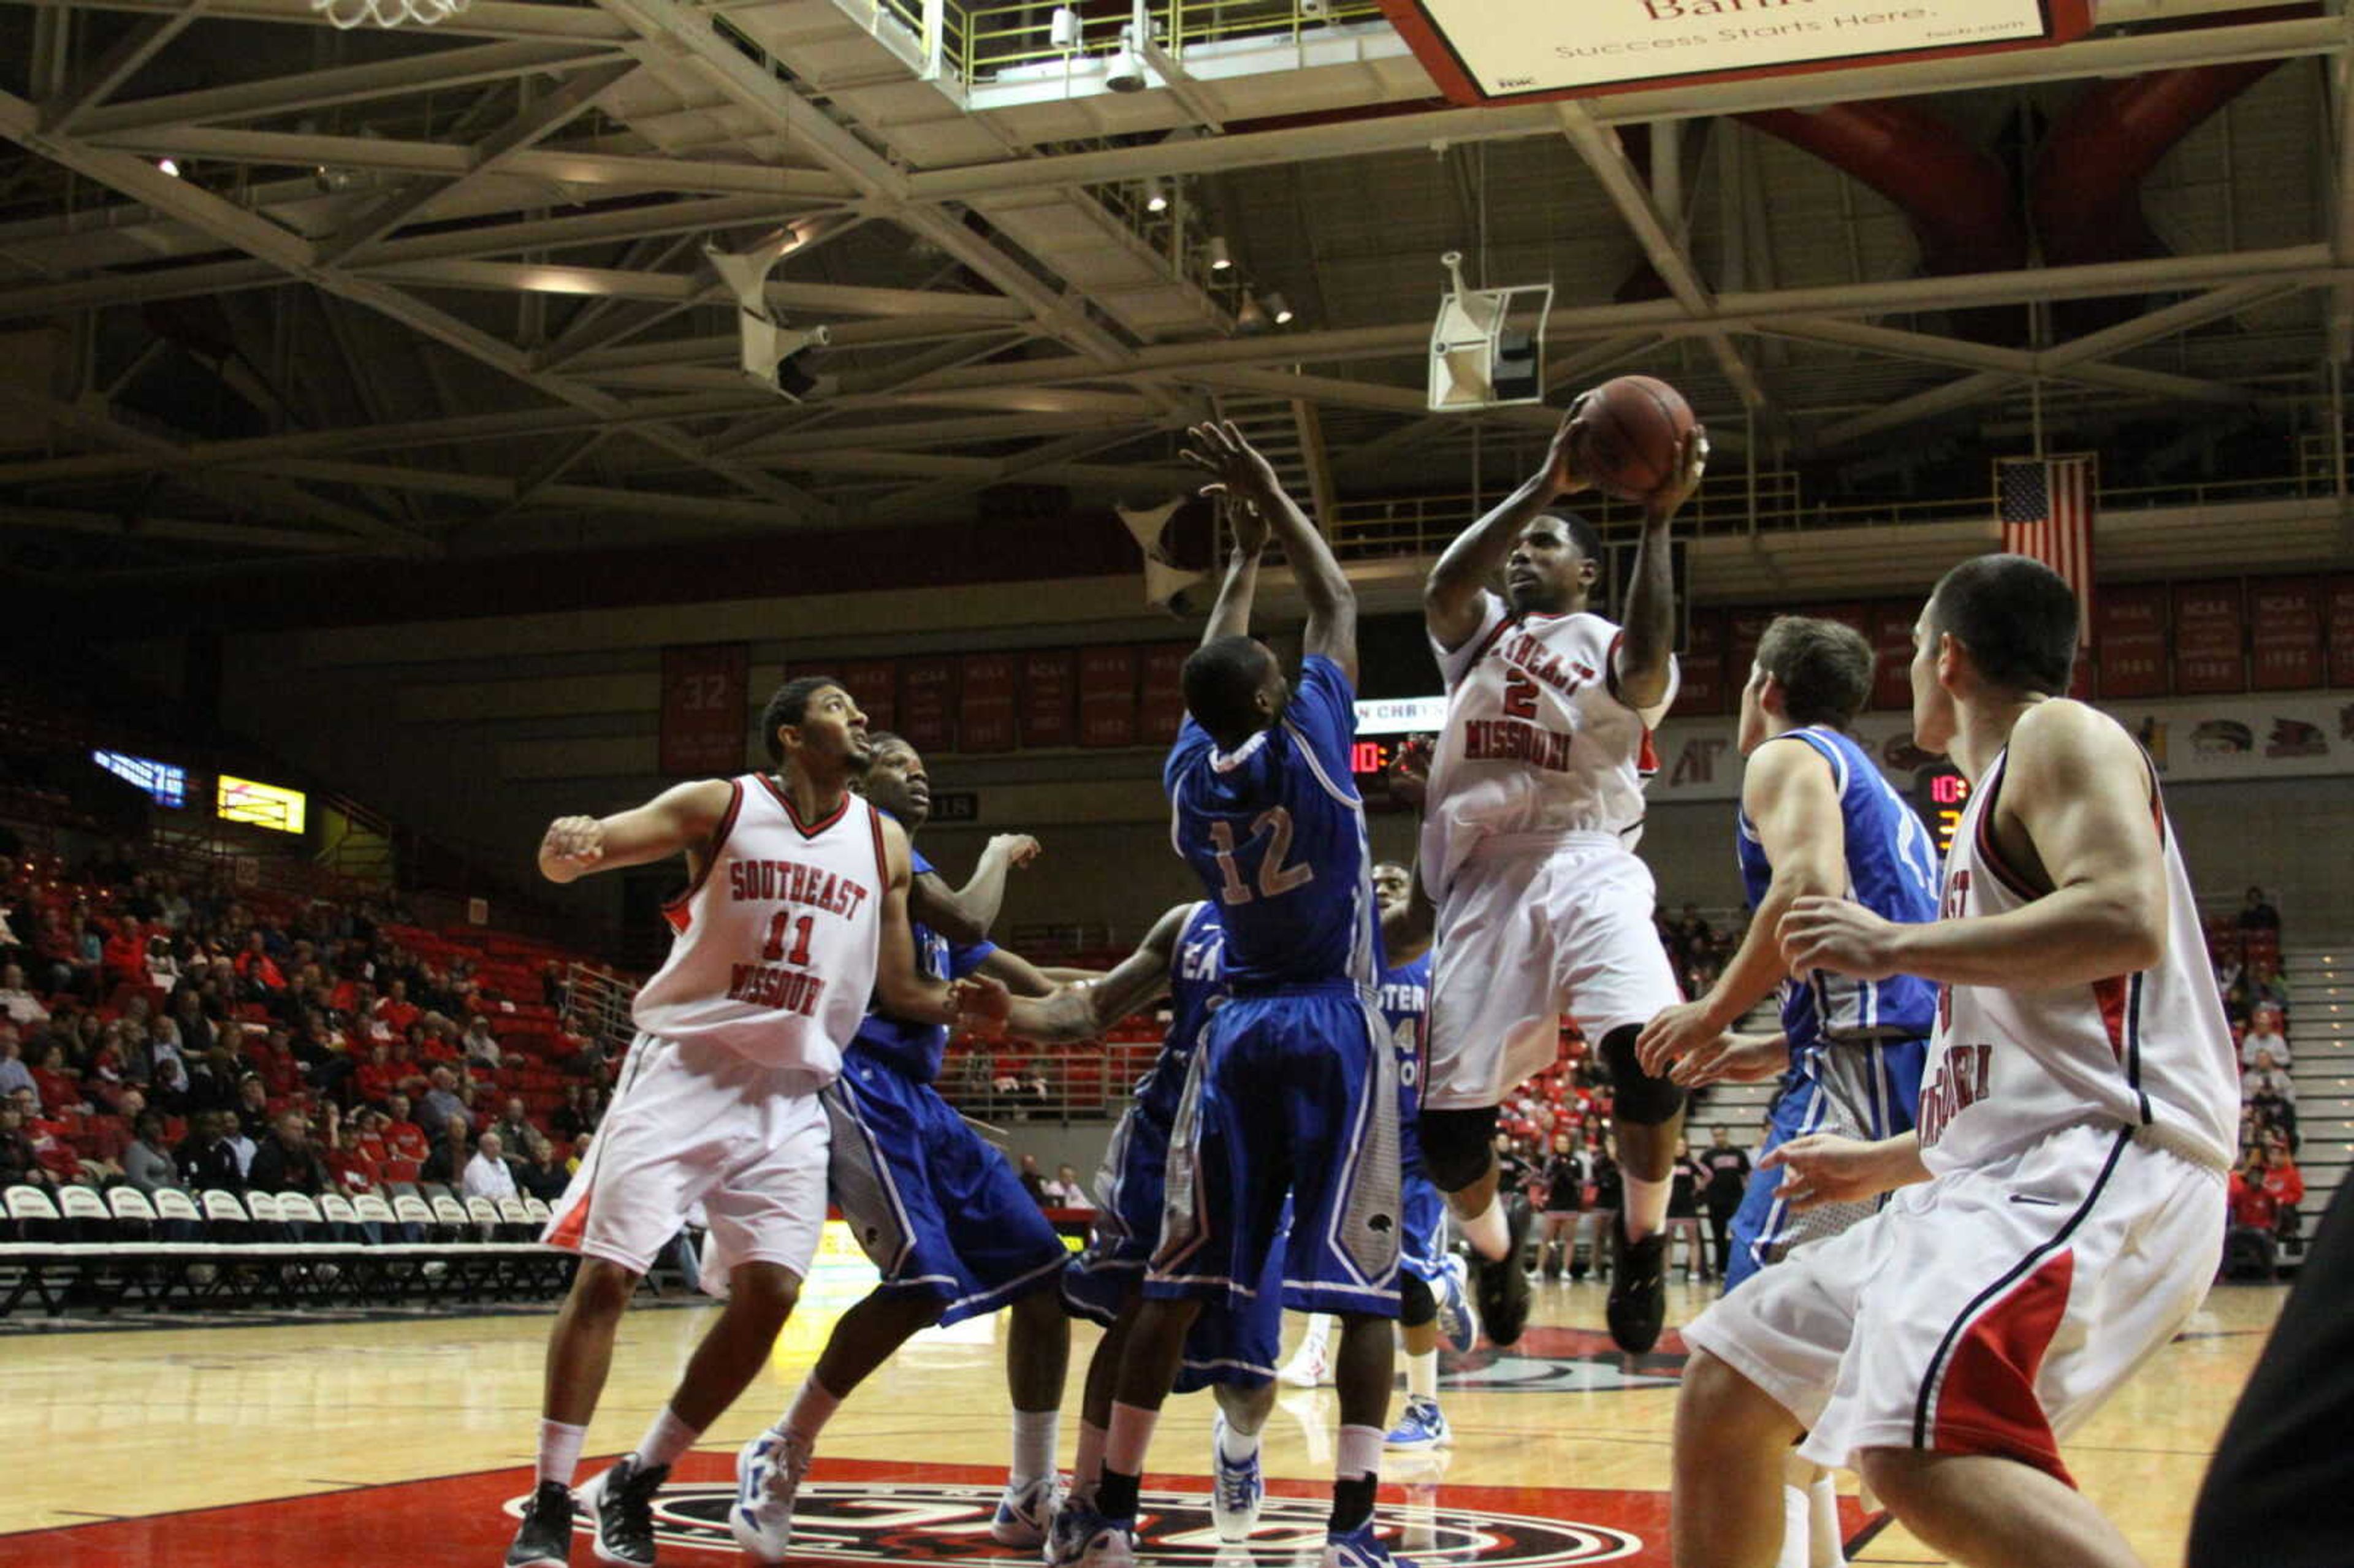 Marcus Brister (2) shoots a close-range jump shot on Jan. 14 against Eastern Illinois. - Photo by Kelso Hope